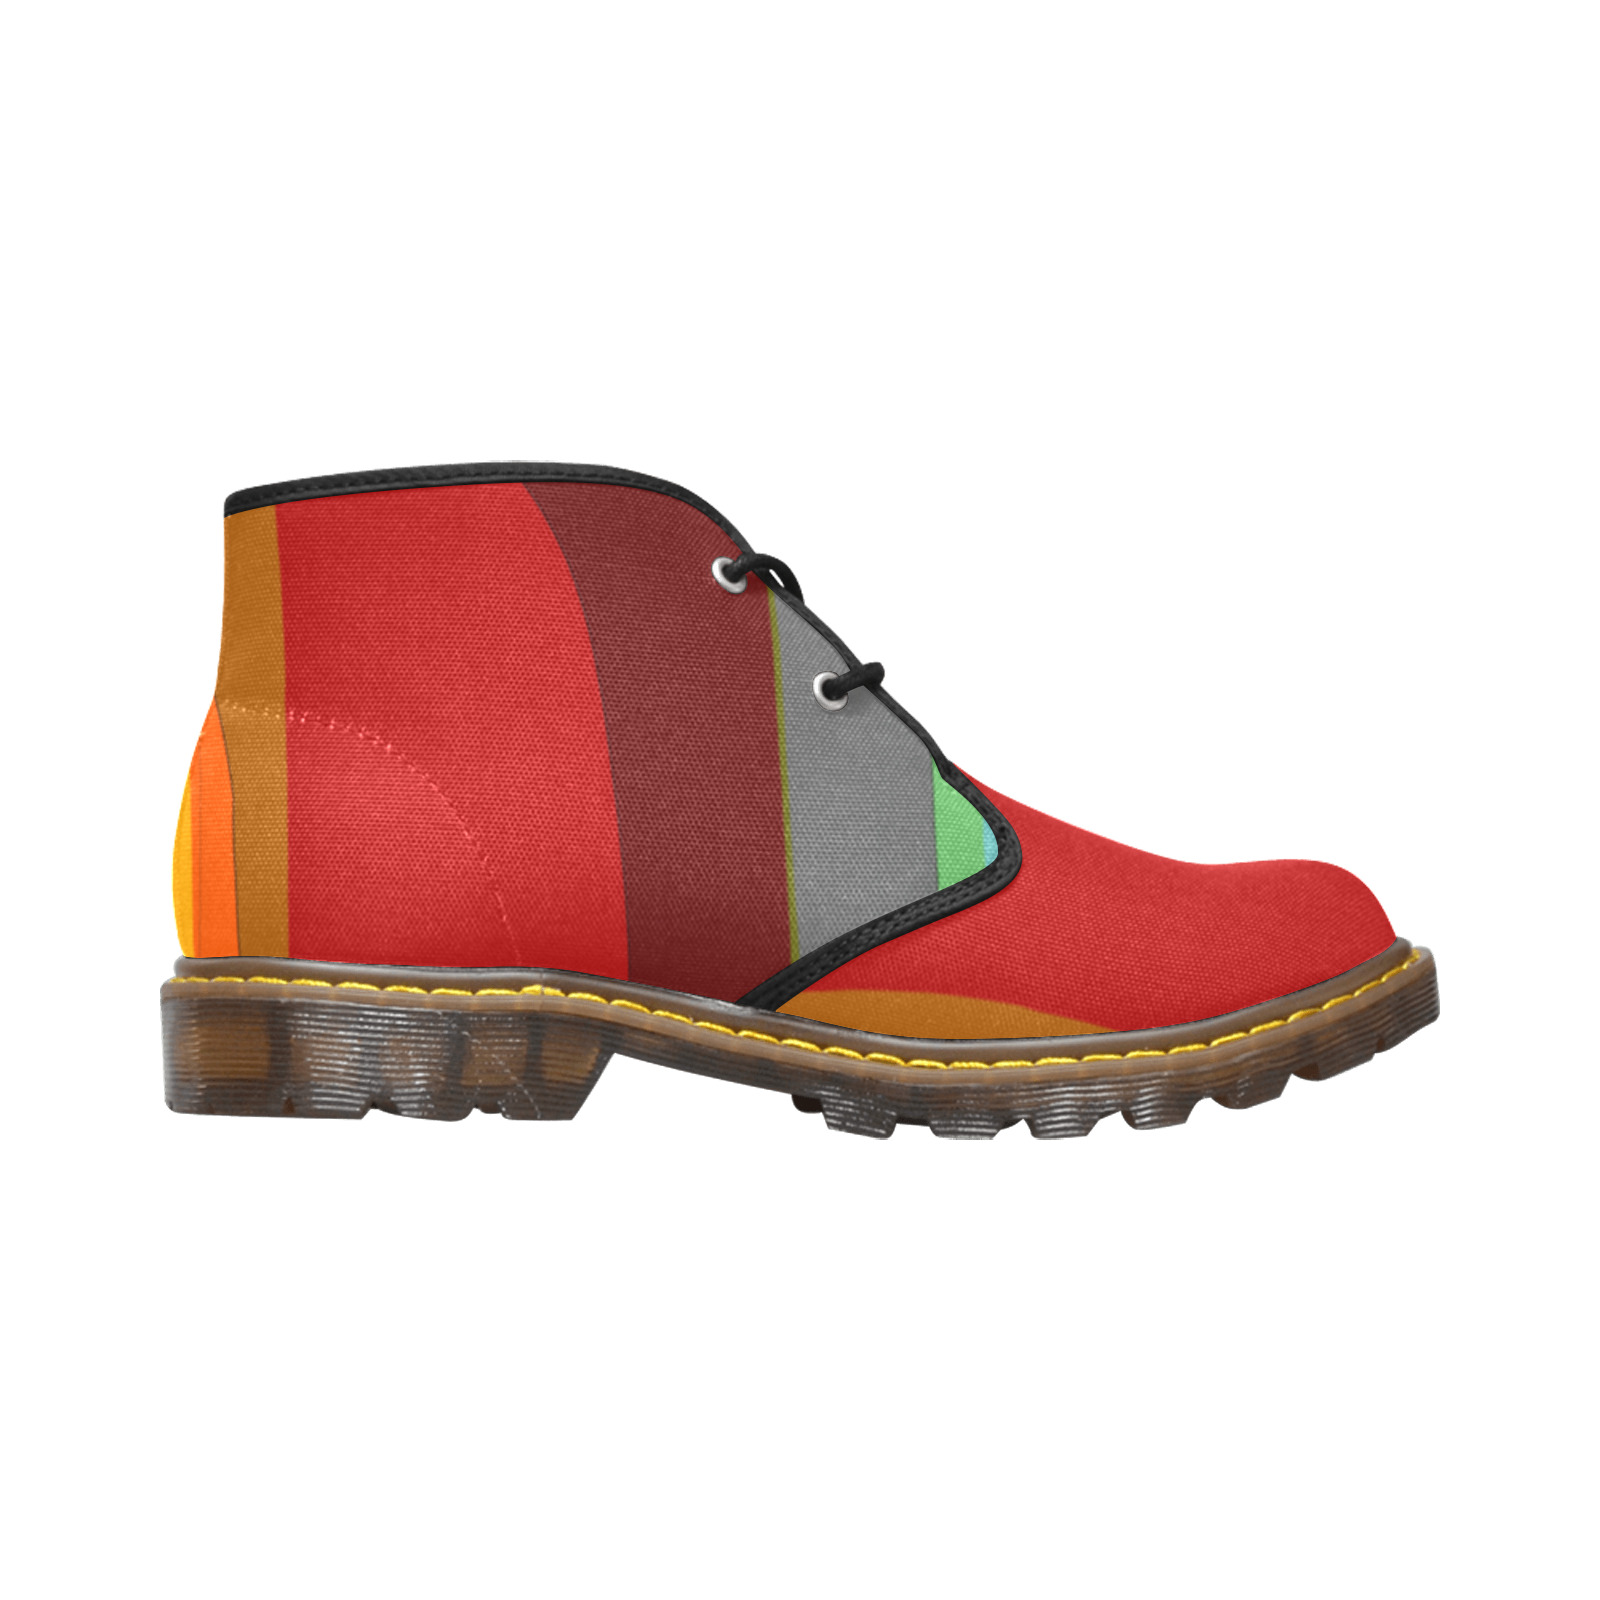 Colorful Abstract 118 Men's Canvas Chukka Boots (Model 2402-1)